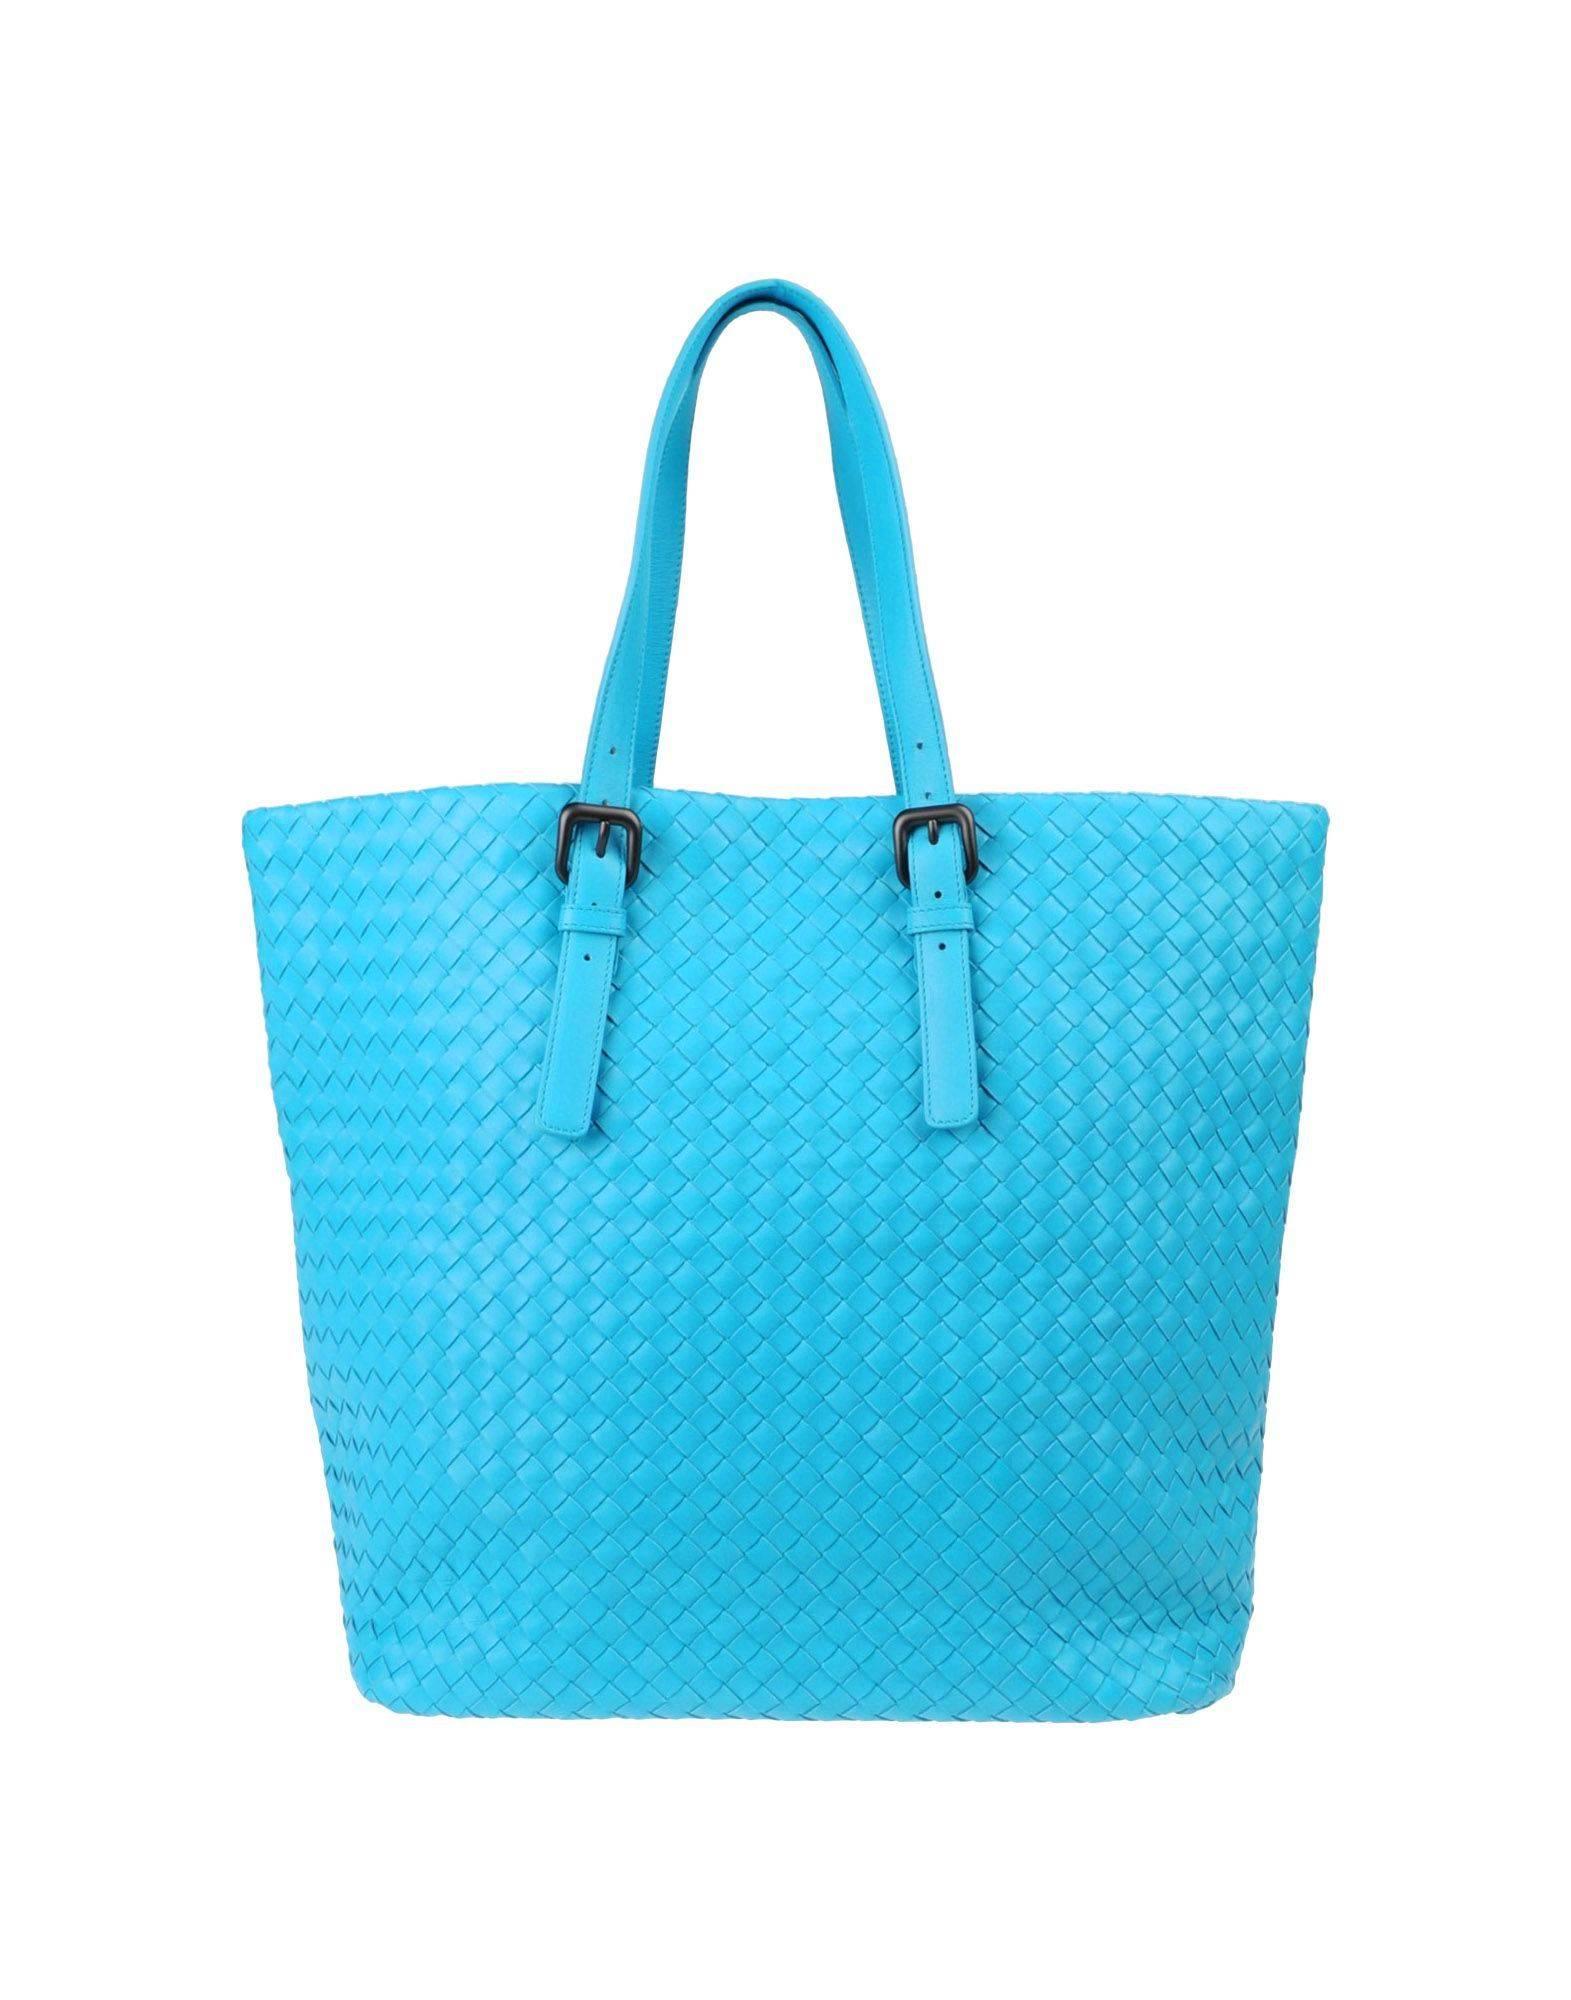 Just Gorgeous! 
NEW Bottega Veneta Intrecciato Napa Tote Handbag 
In The So Hard To Find Turquoise Aqua Color   

Details: 

A Bottega Veneta signature piece that will last you for many years
Beautiful turquoise color
Huge XL size
Can be worn over